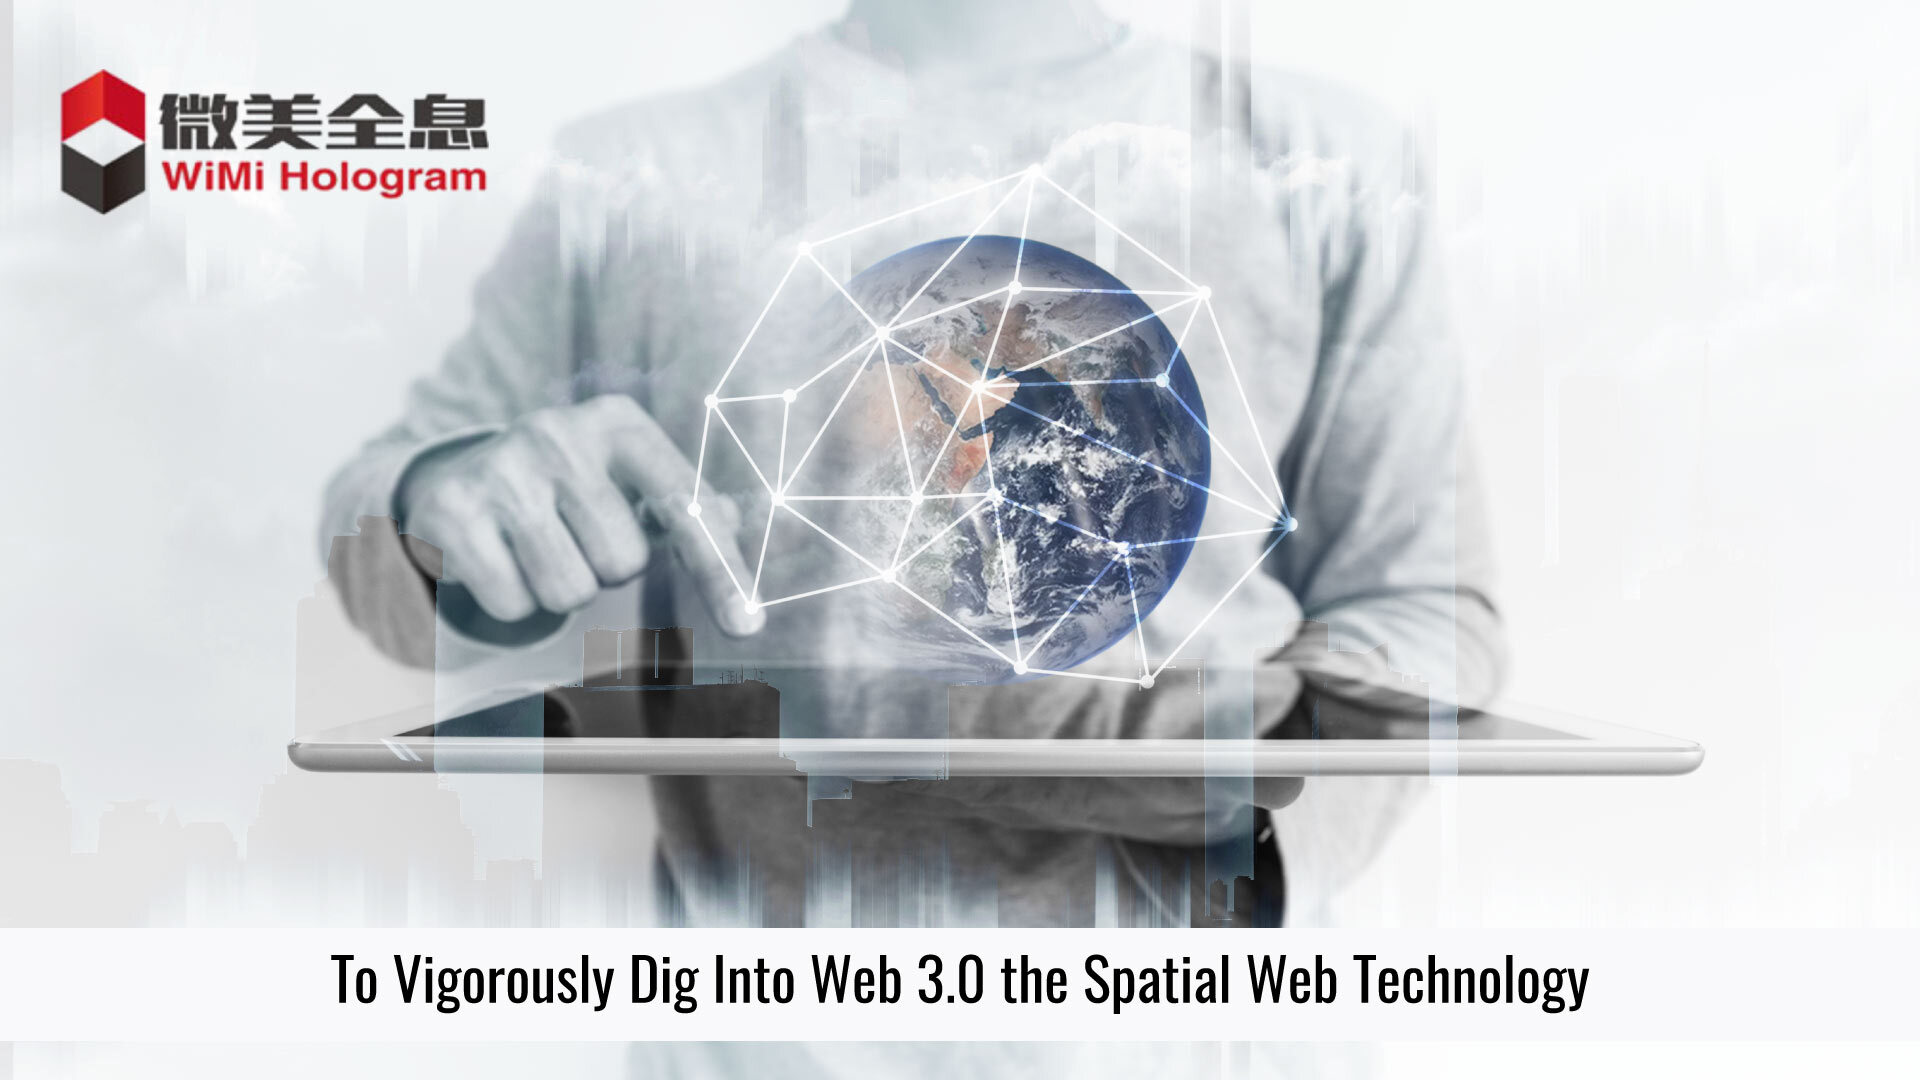 WiMi Hologram Cloud to Vigorously Dig Into Web 3.0 the Spatial Web Technology